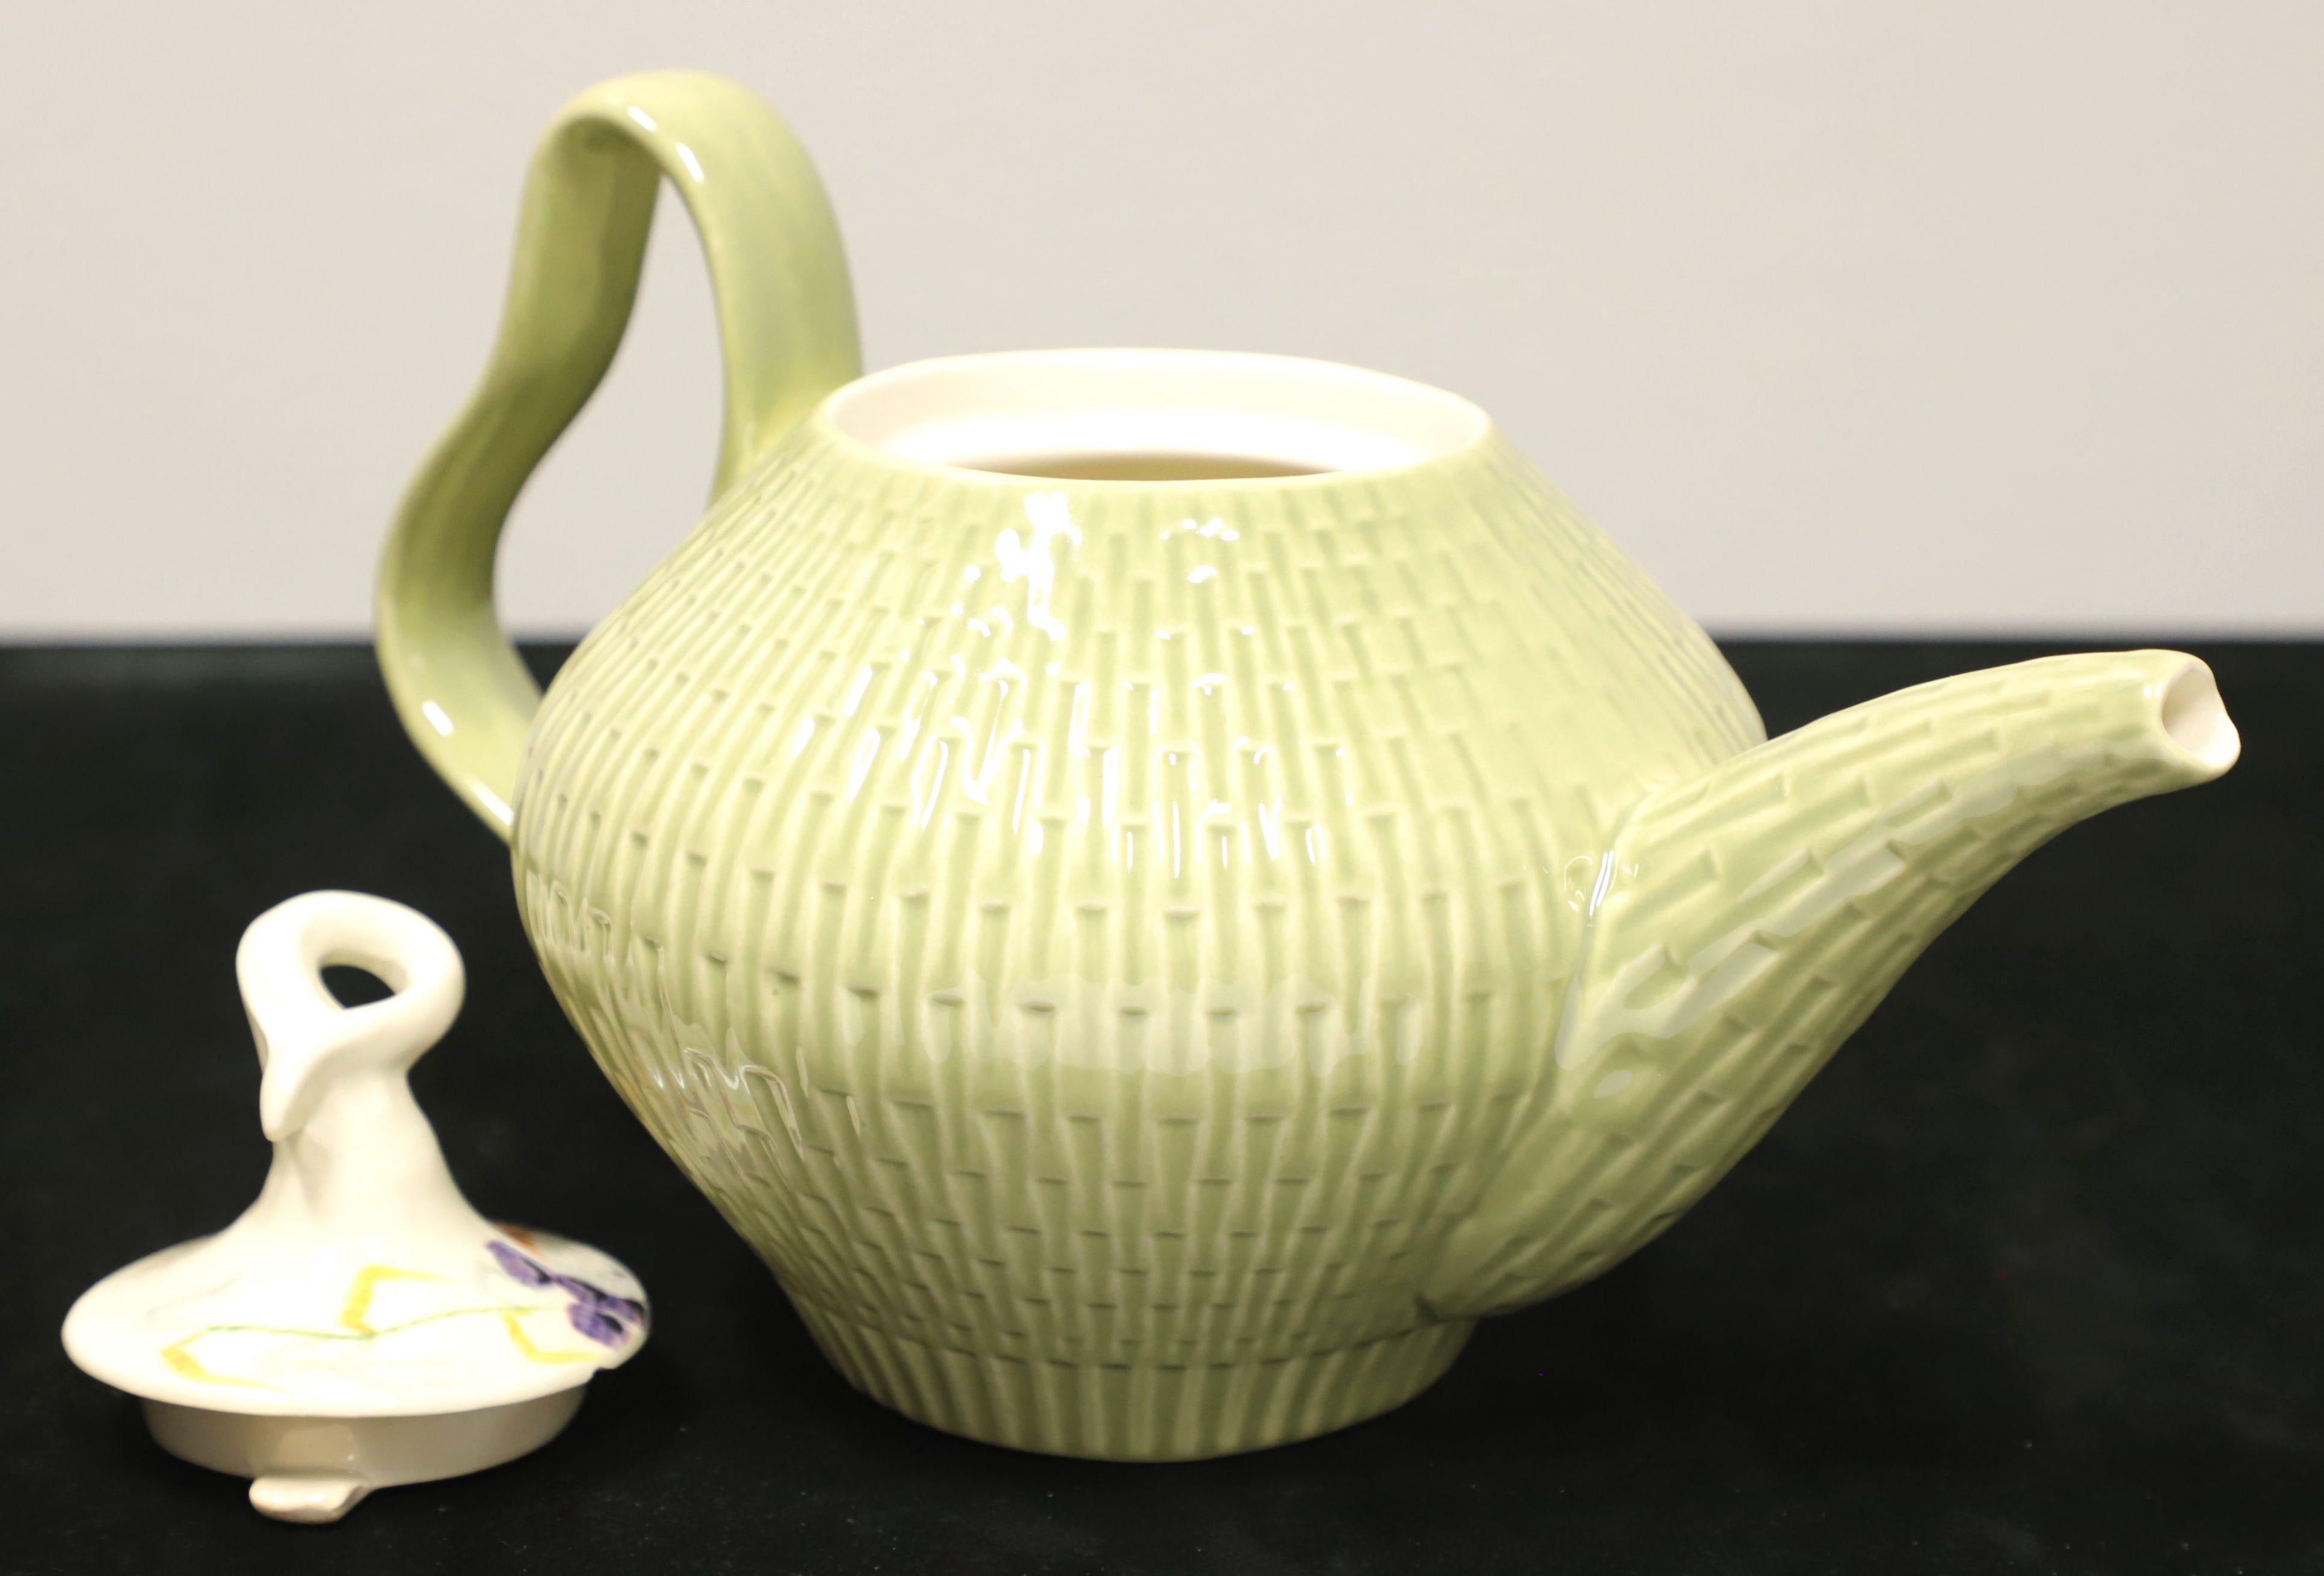 A Mid 20th Century tea pot with lid by Red Wing, in their Capistrano pattern. Pot has a round shape, smooth cream color interior and sage green color basket weave exterior, pour spout & handle. Lid has a unique curled stem-like handle and is hand